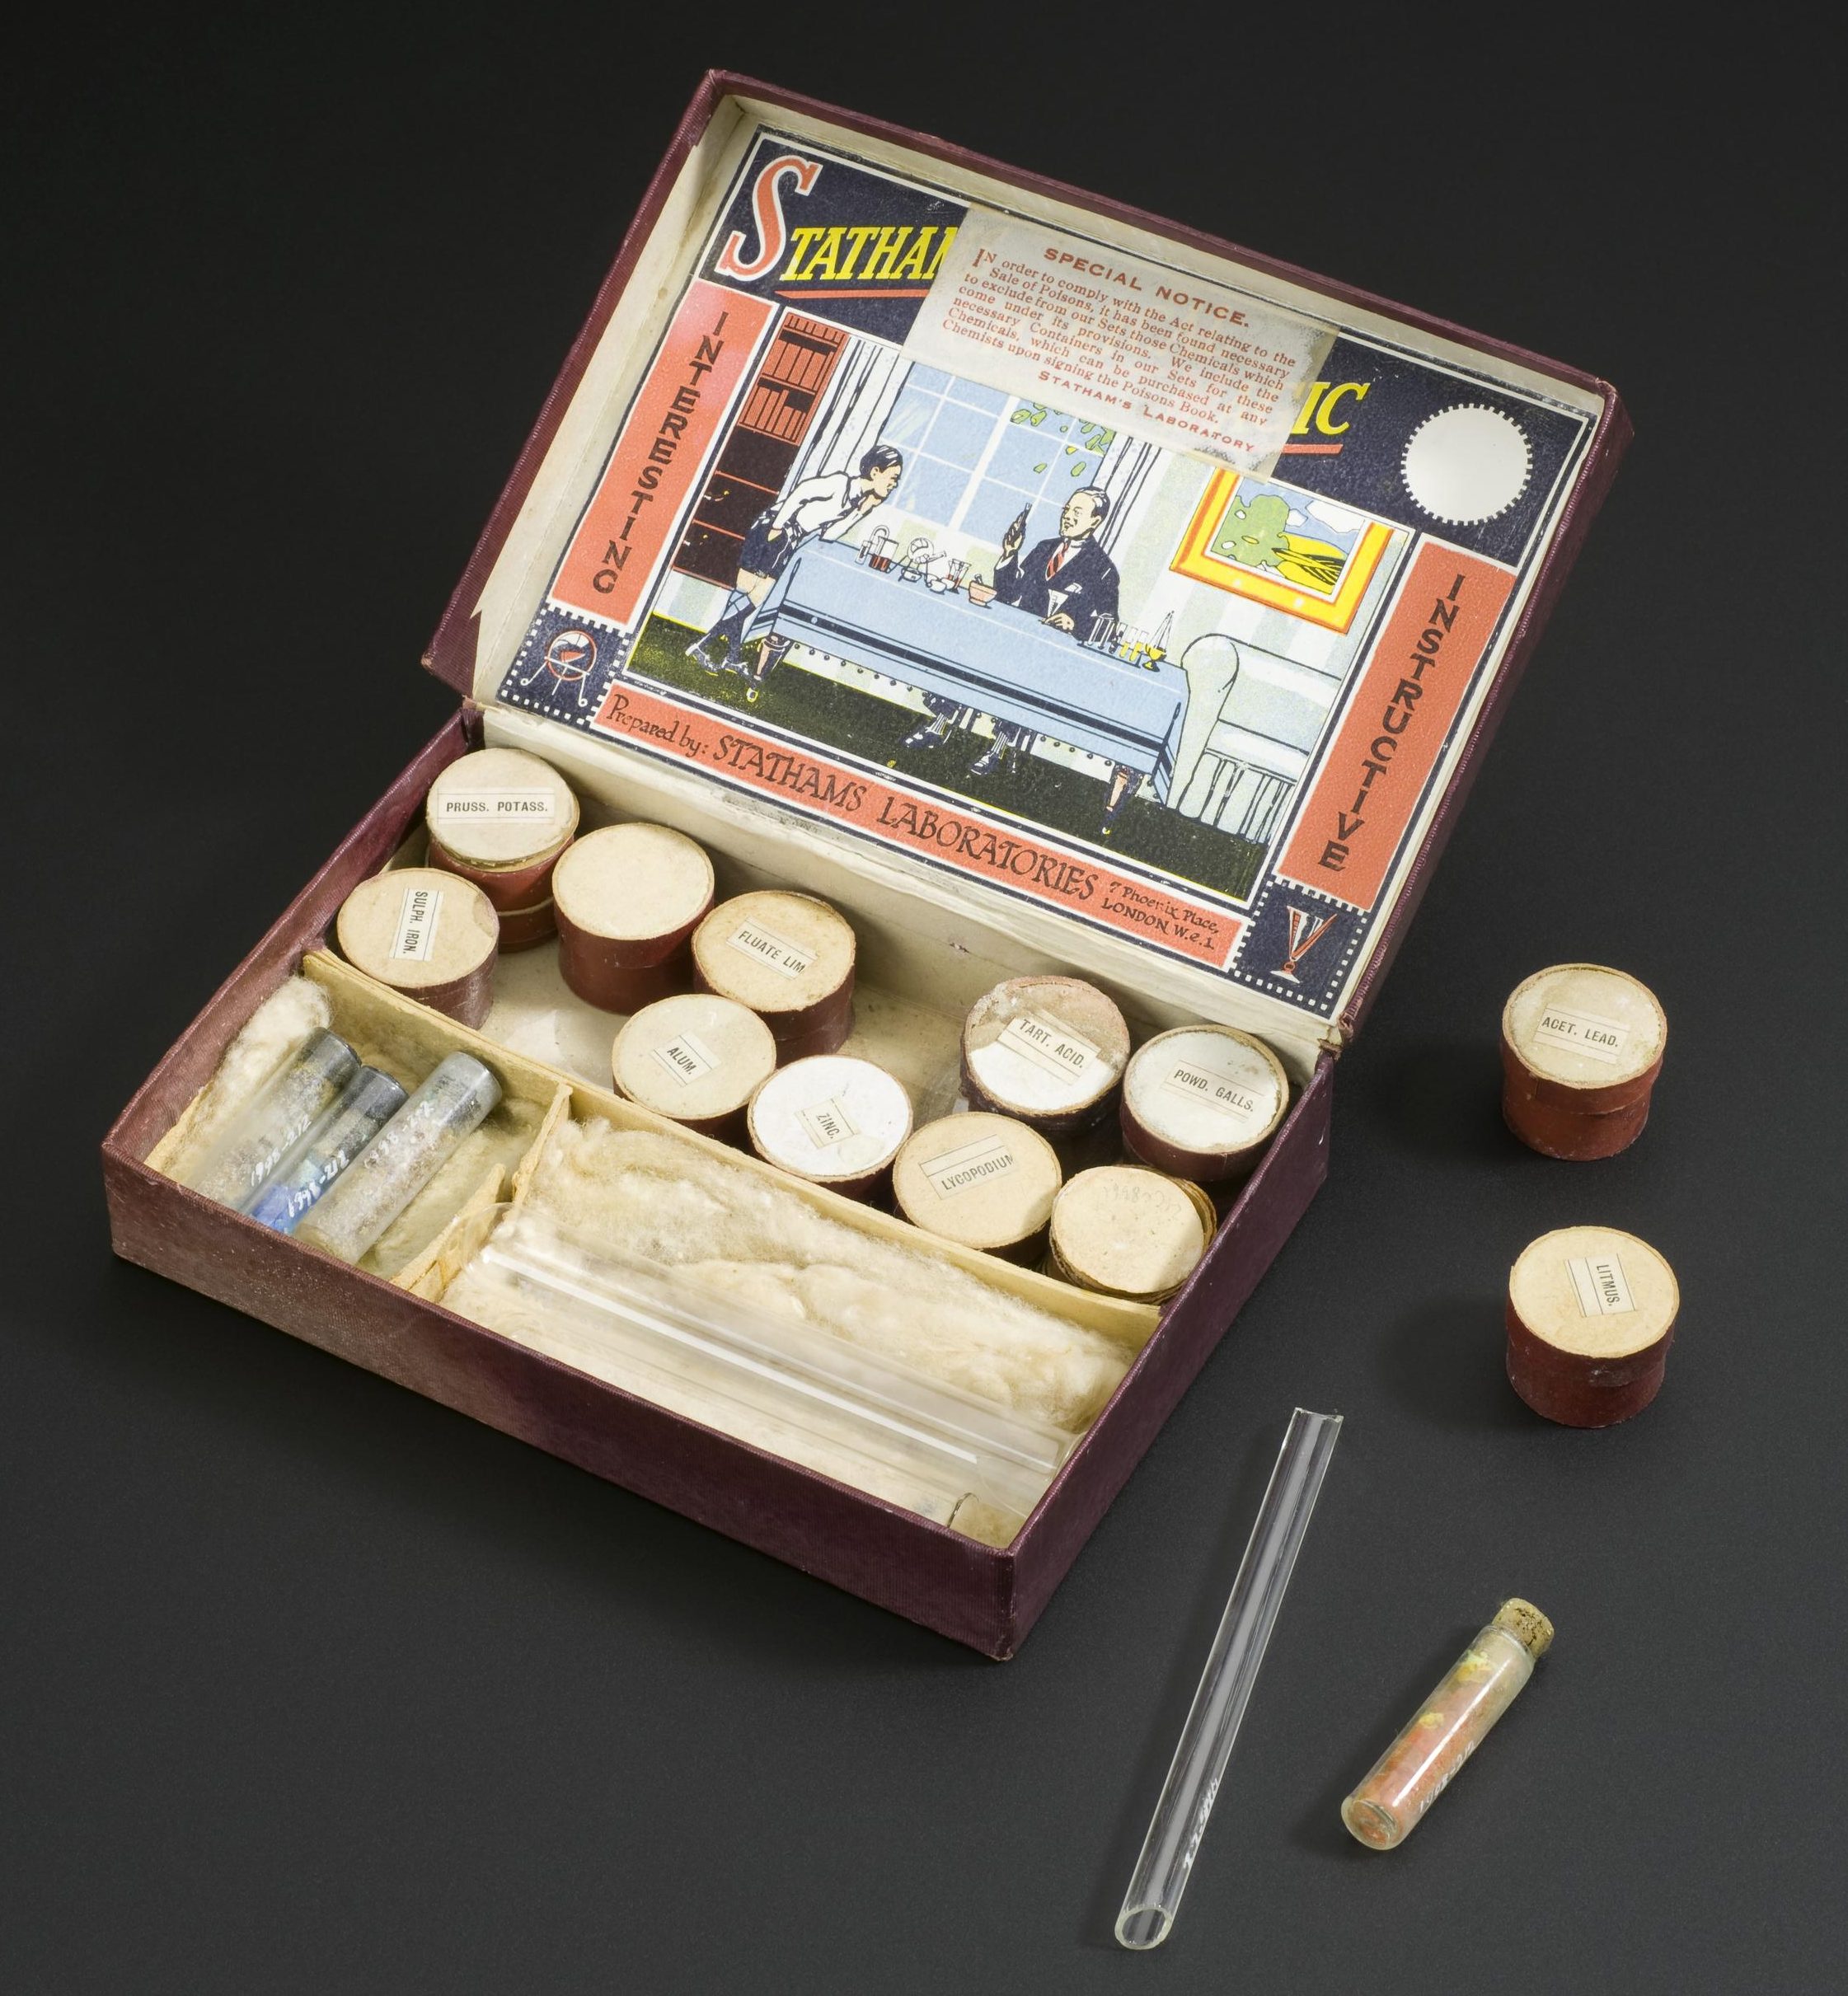 Stathams Chemical Magic chemistry set by Stathams Laboratories, London with instructions and cardboard case. Overhead view of whole object (open) against graduated grey background.